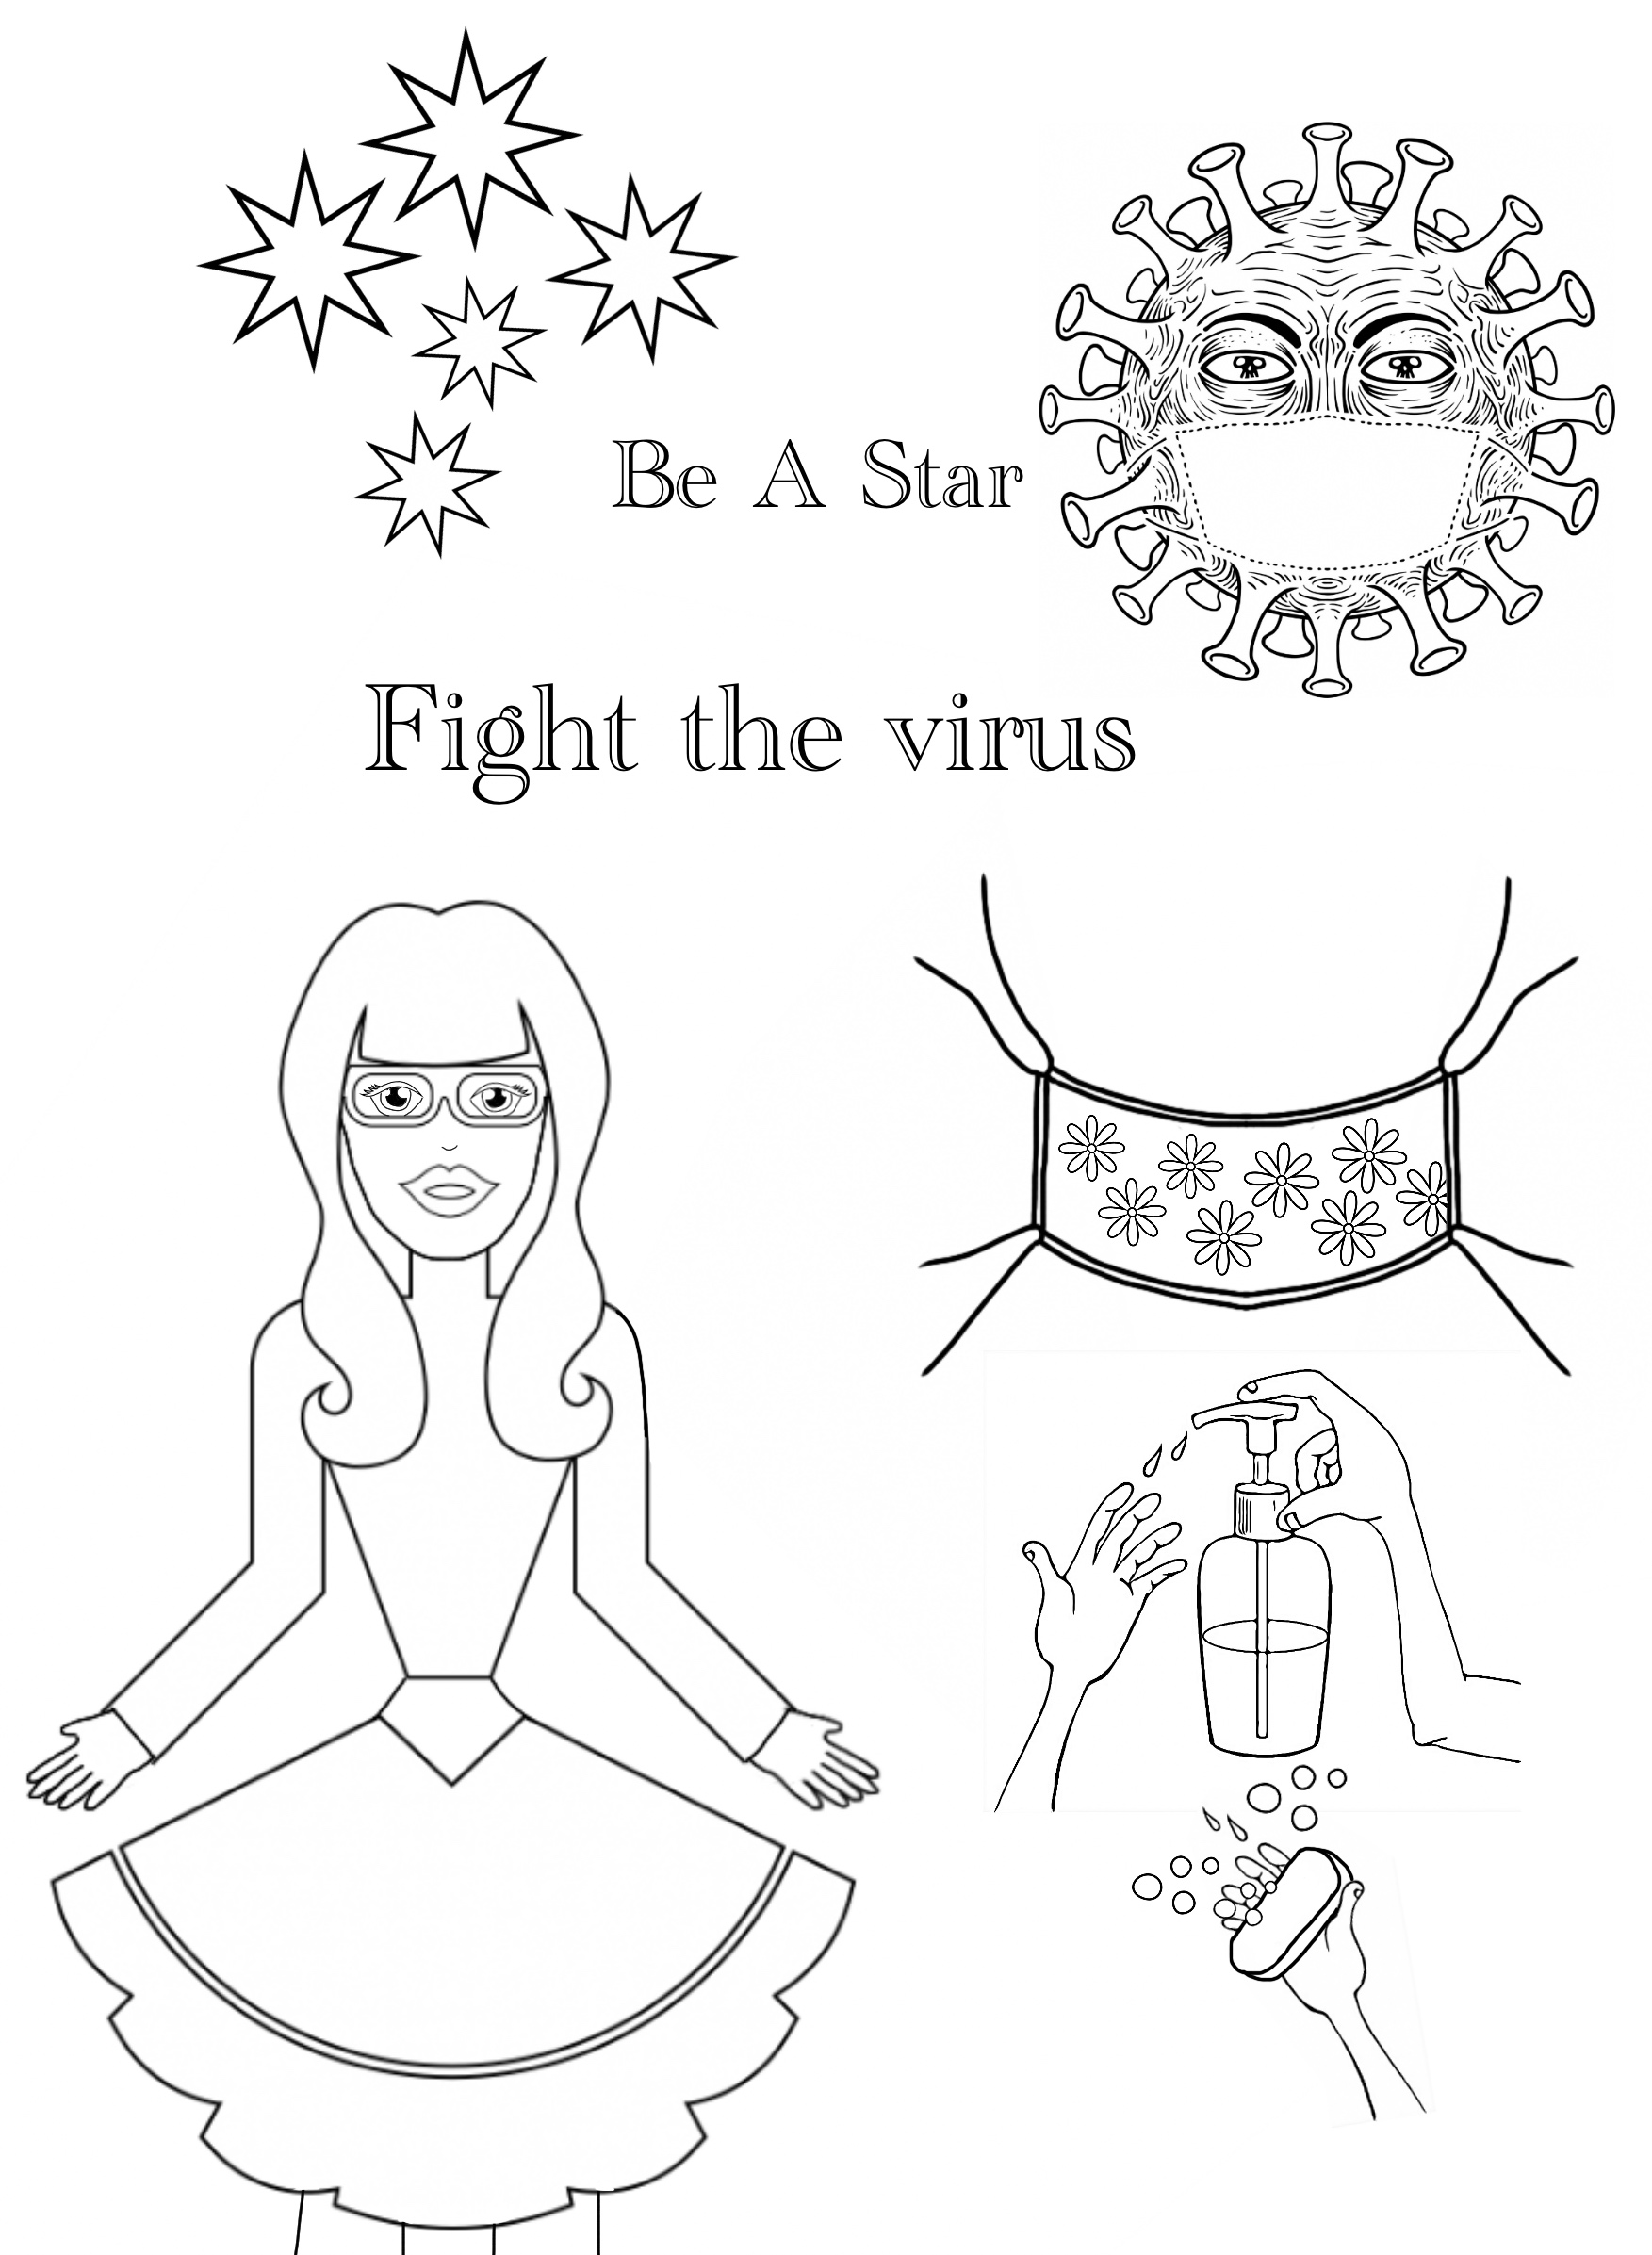 Fight Covid coloring page for kids